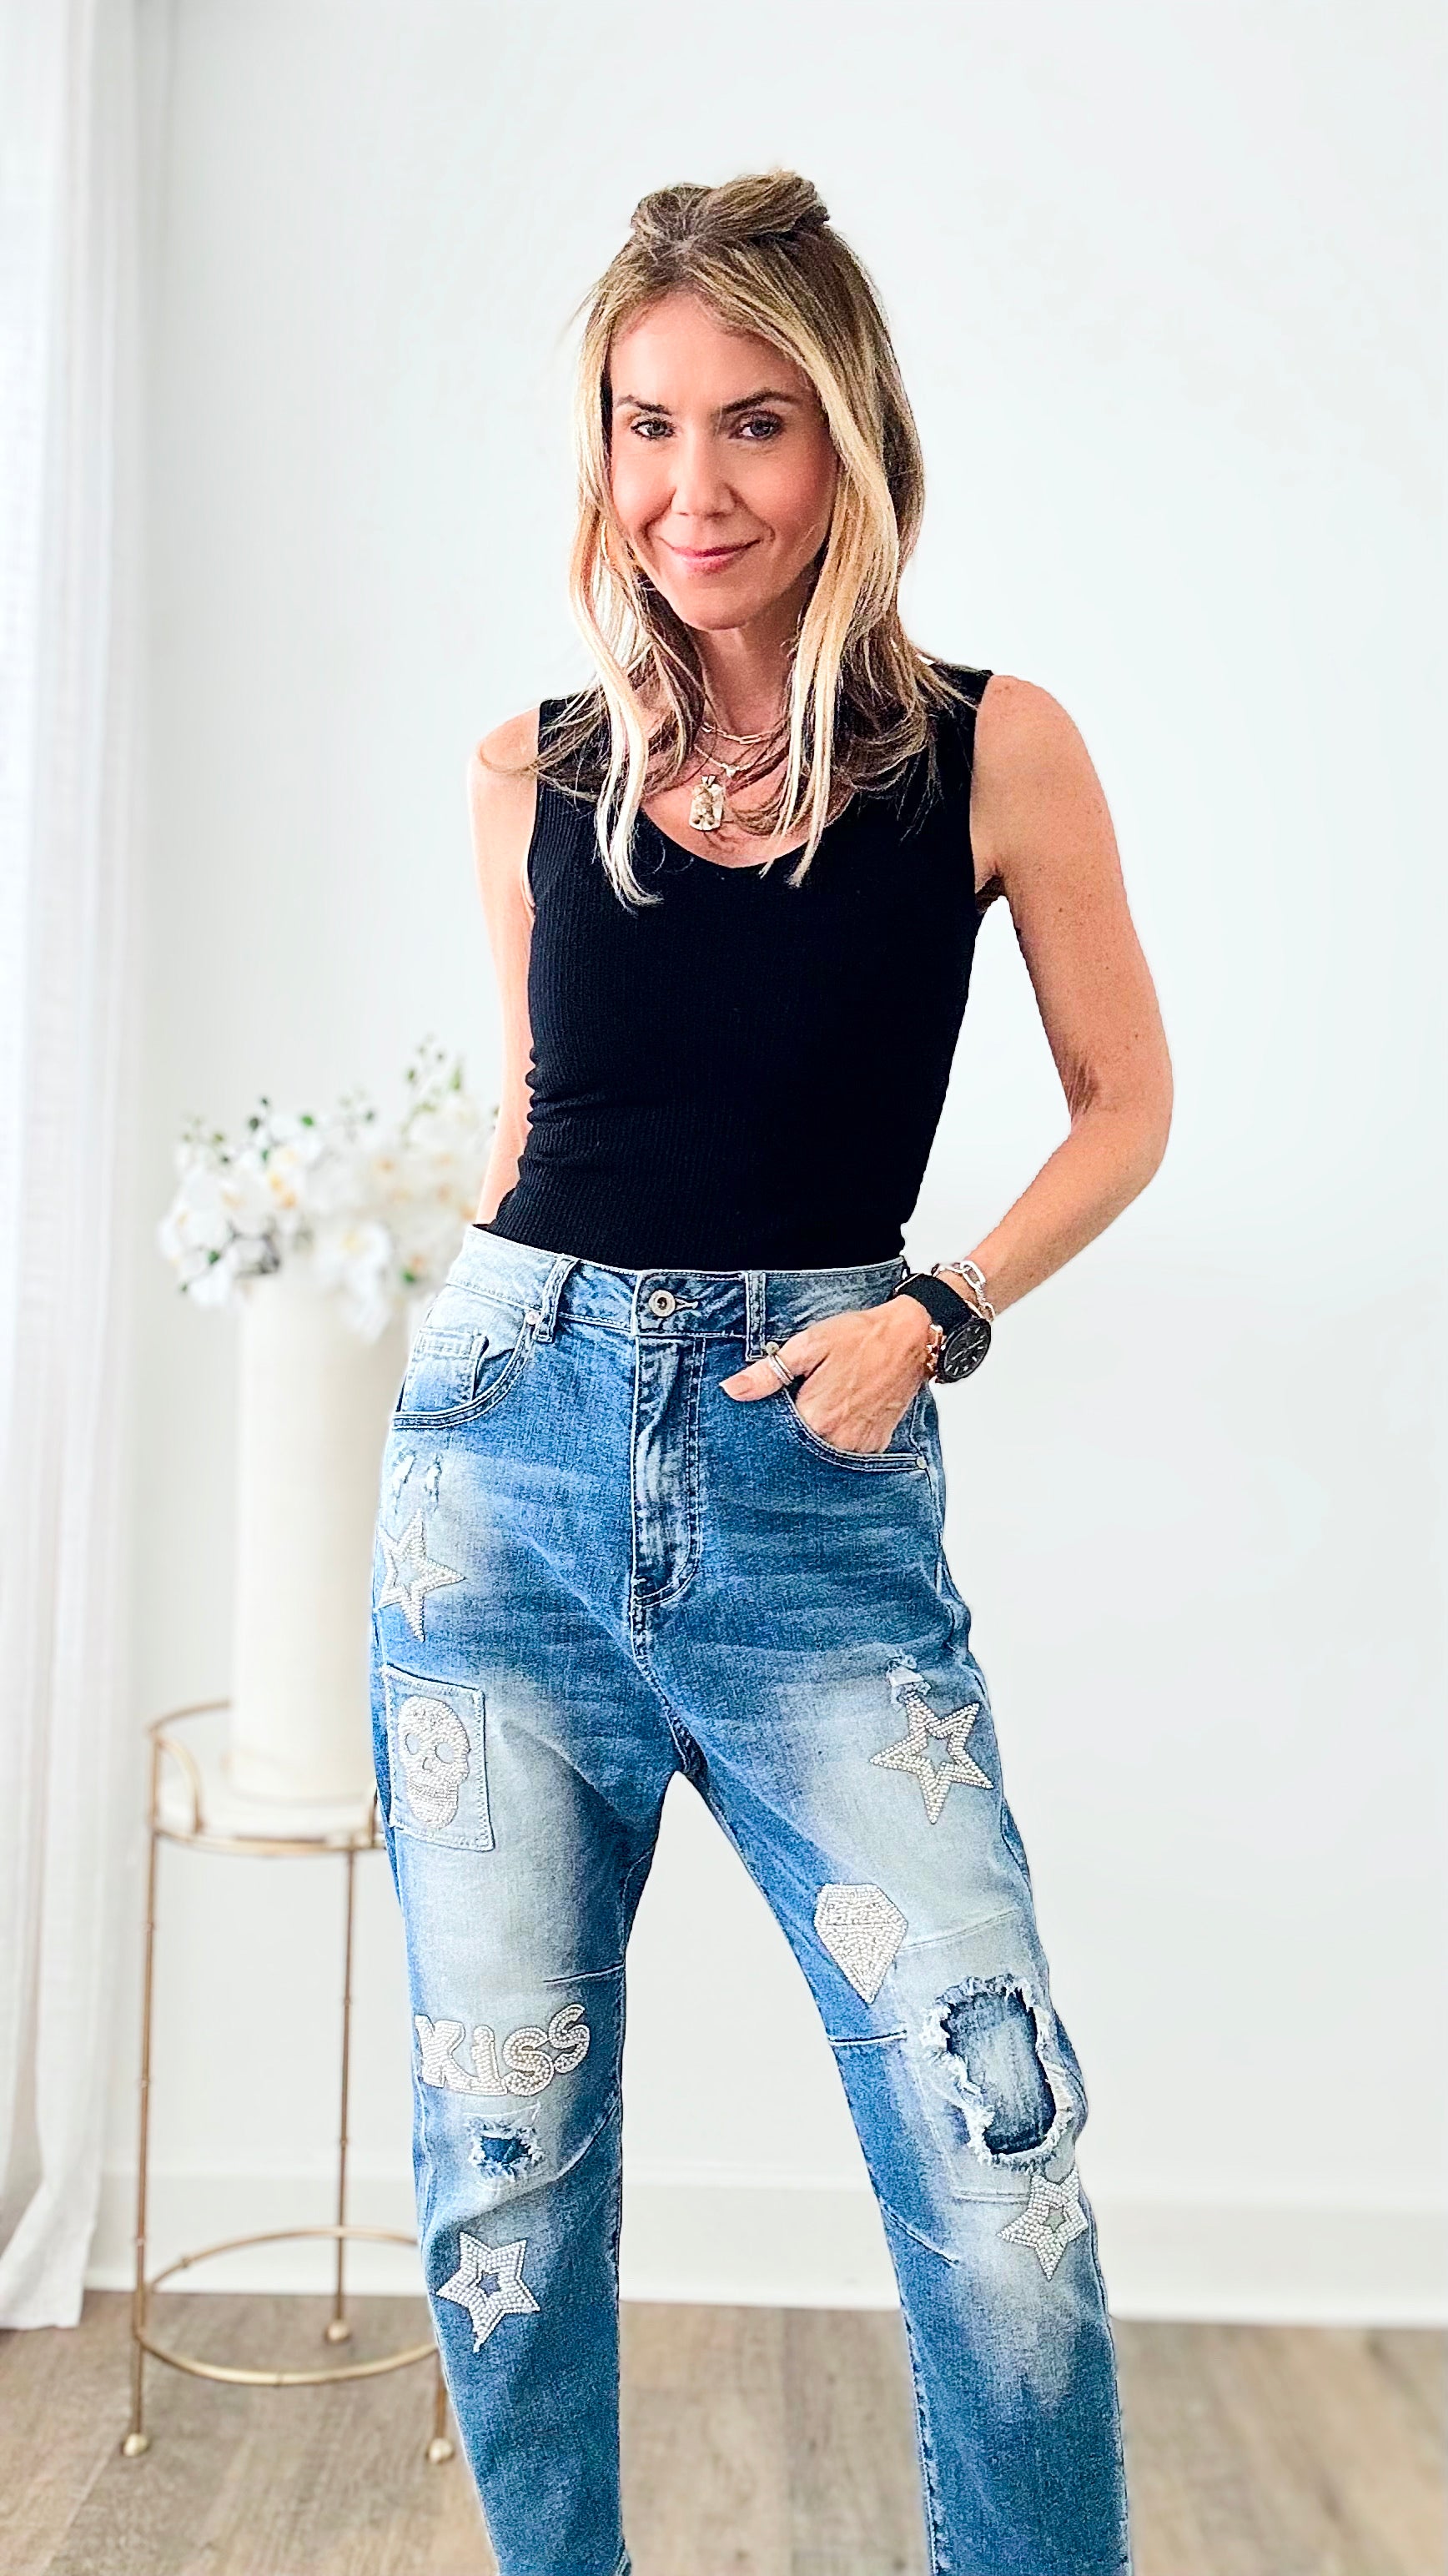 Pearl Adorned Italian Denim-190 Denim-Germany-Coastal Bloom Boutique, find the trendiest versions of the popular styles and looks Located in Indialantic, FL